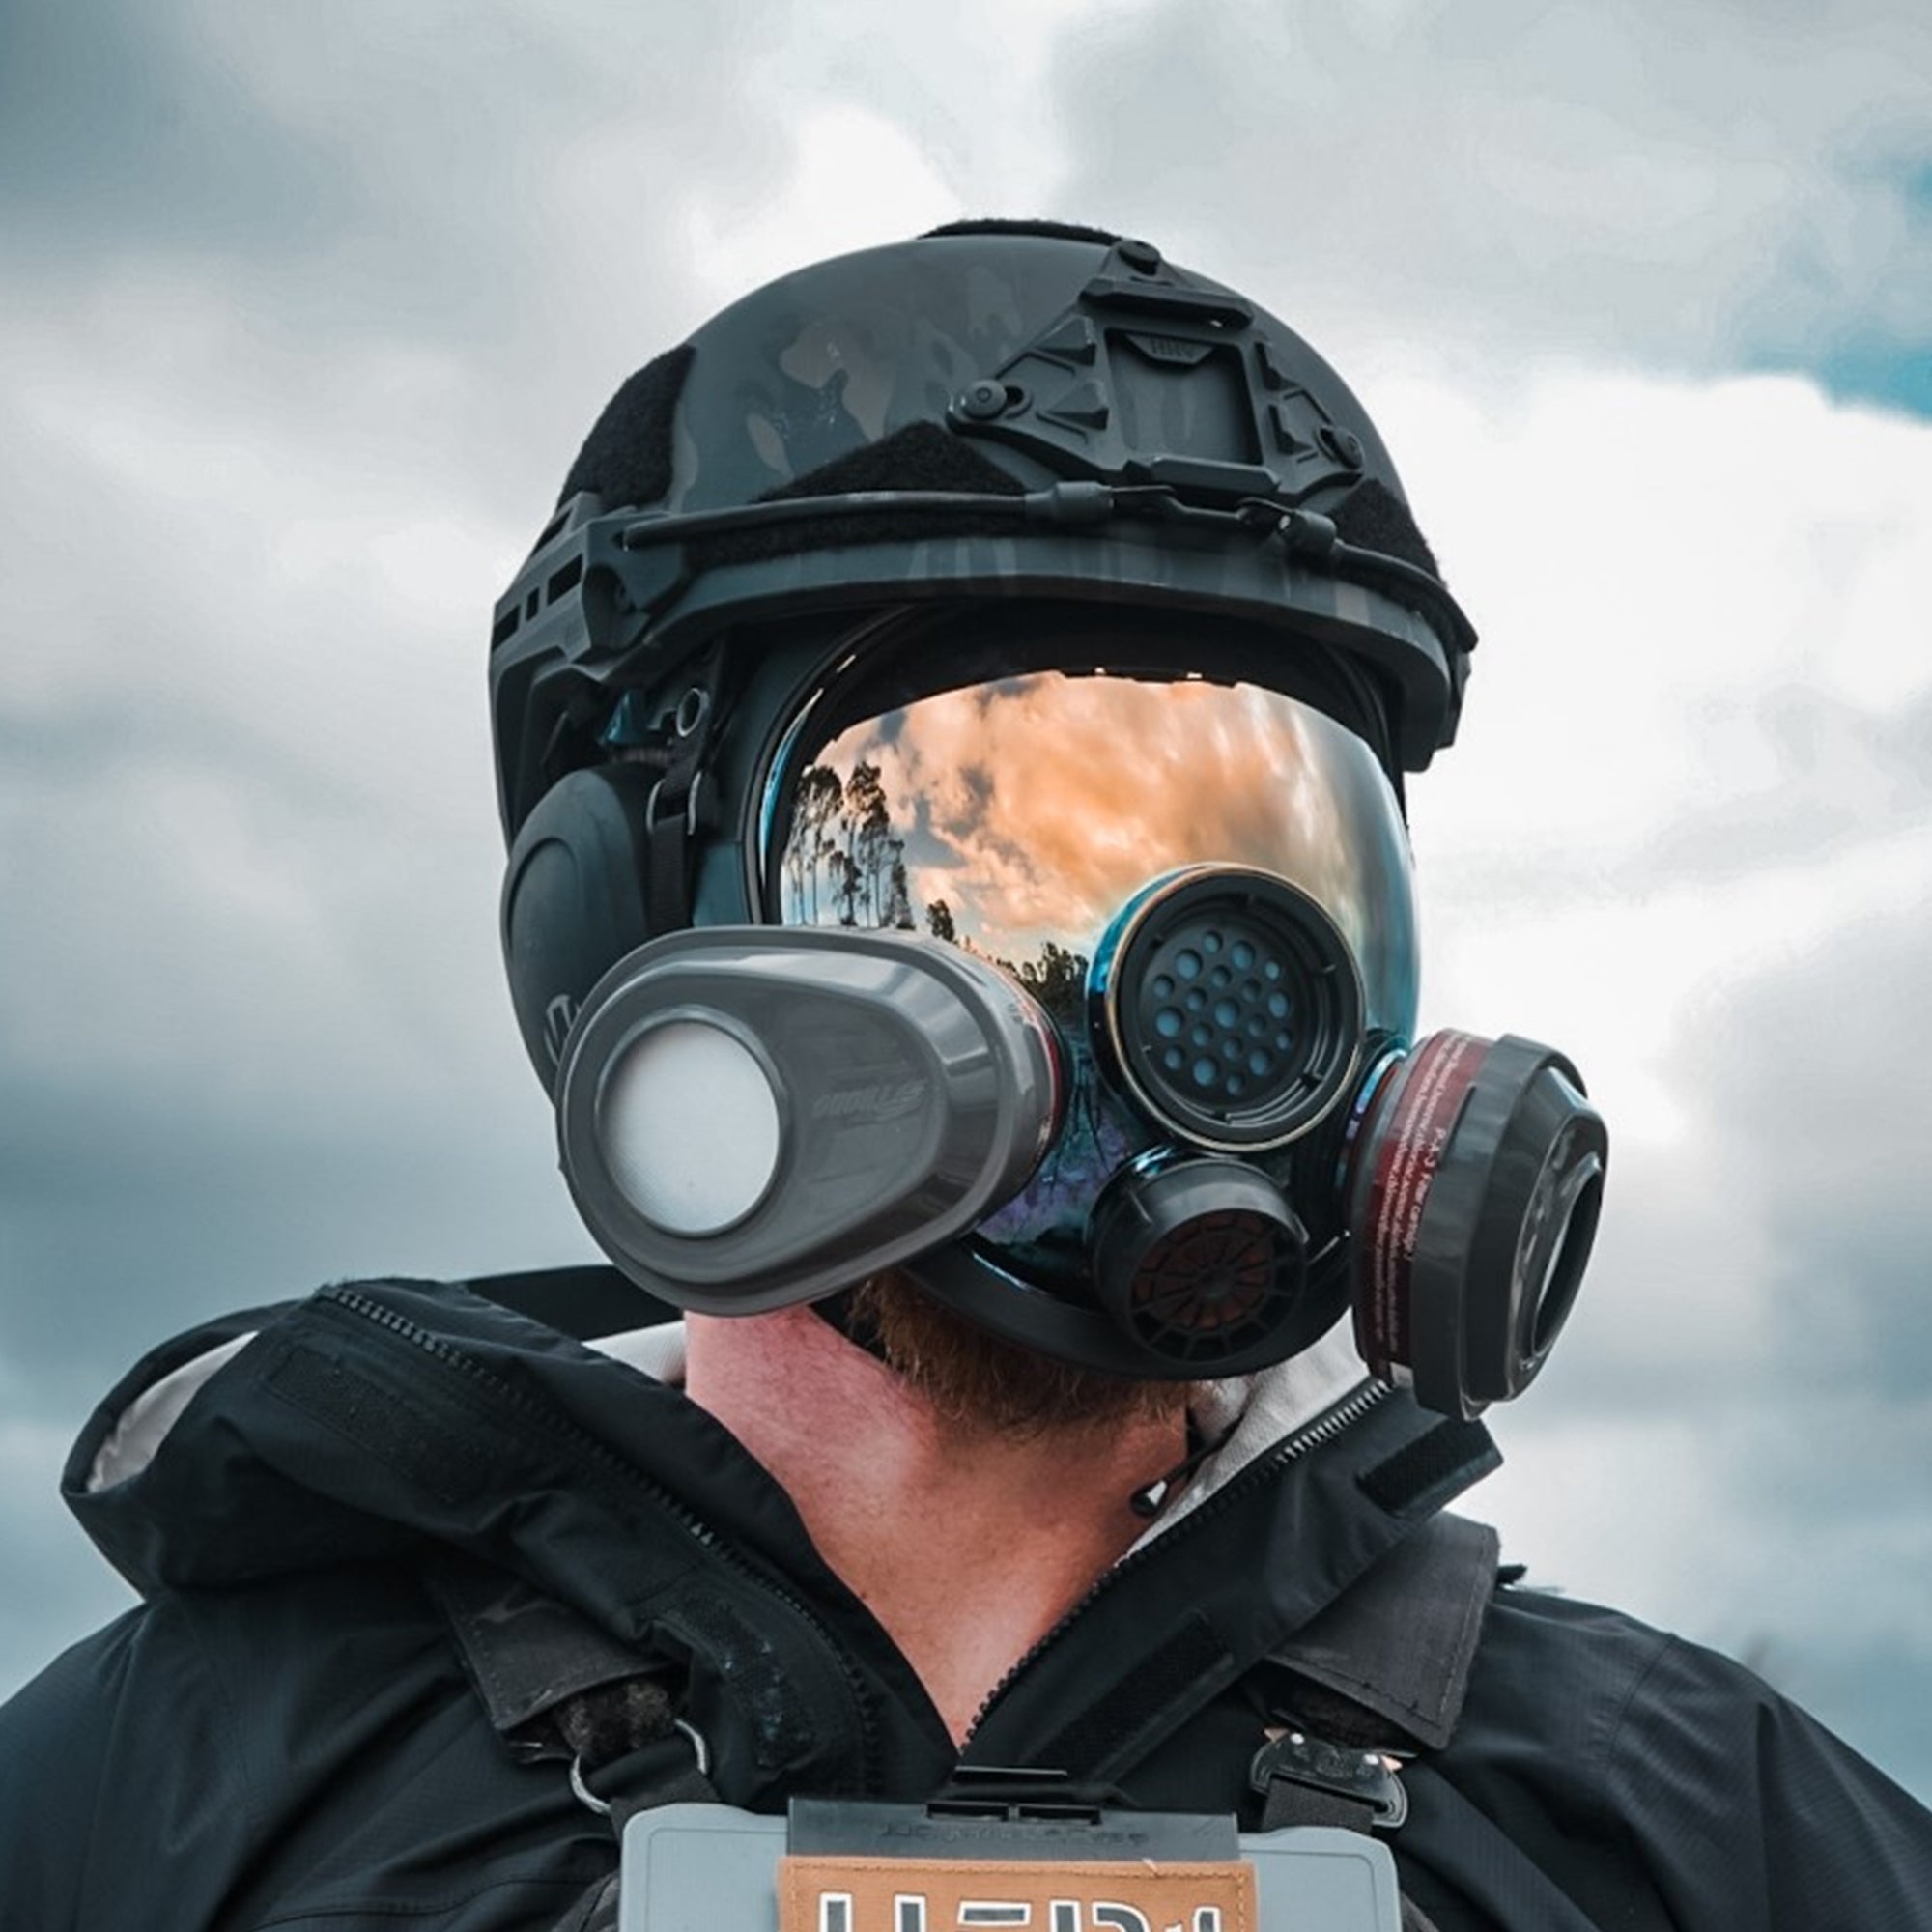 Load image into Gallery viewer, PD - 101 Burnt Bronze Mirrored - Full Face Respirator Gas Mask with Organic Vapor and Particulate Filtration - Parcil SafetyRespiratorsRespiratorsParcil Safety